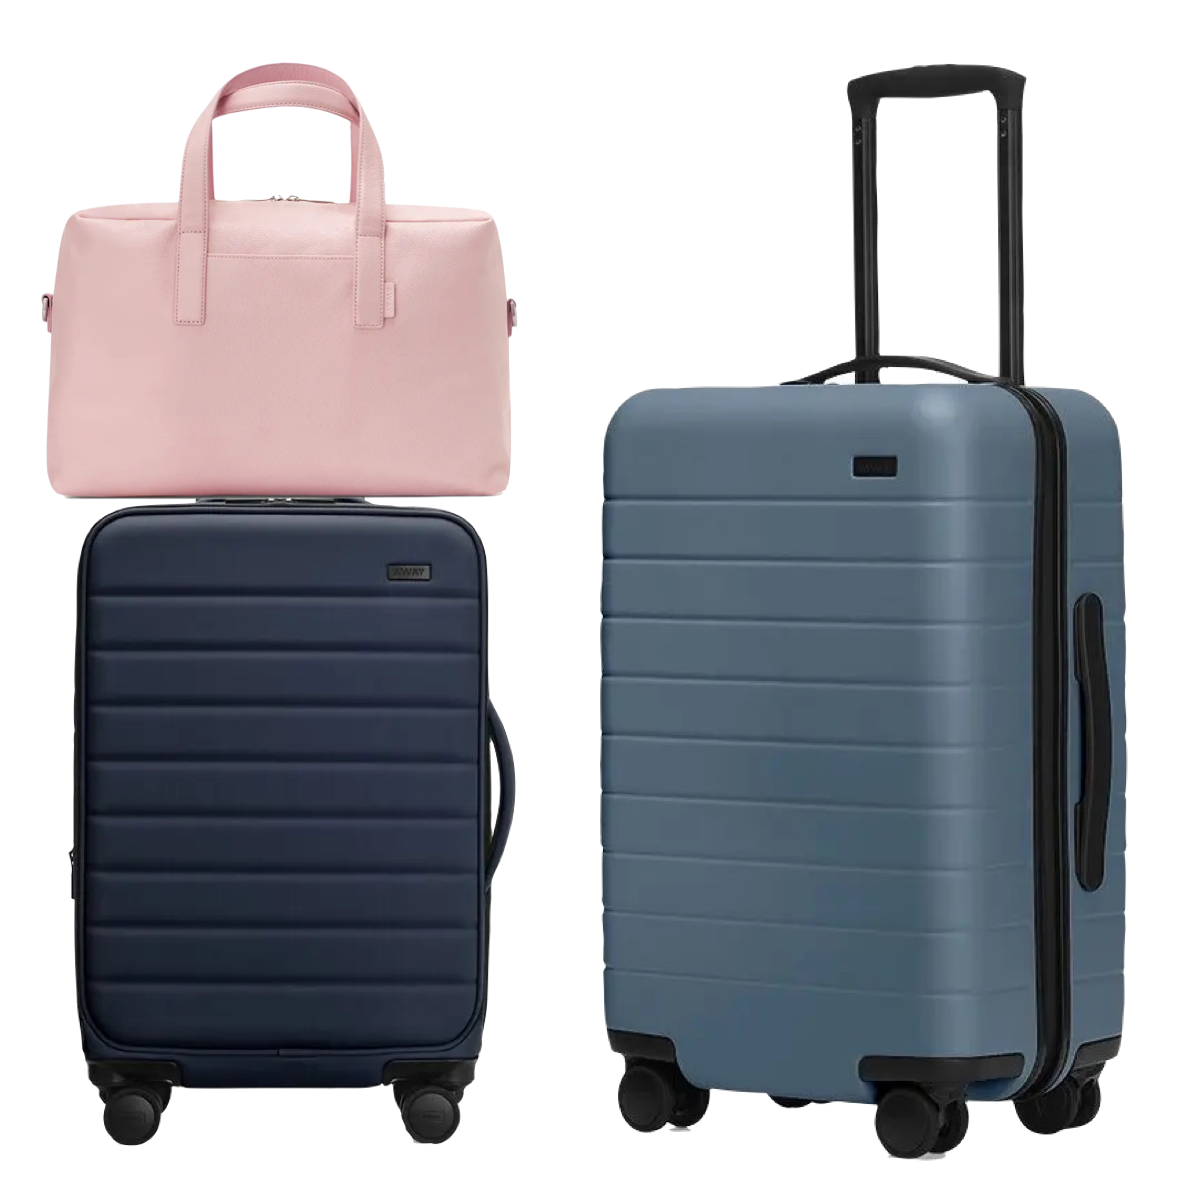 Shop AWAY Luggage & Travel Bags by CREAW